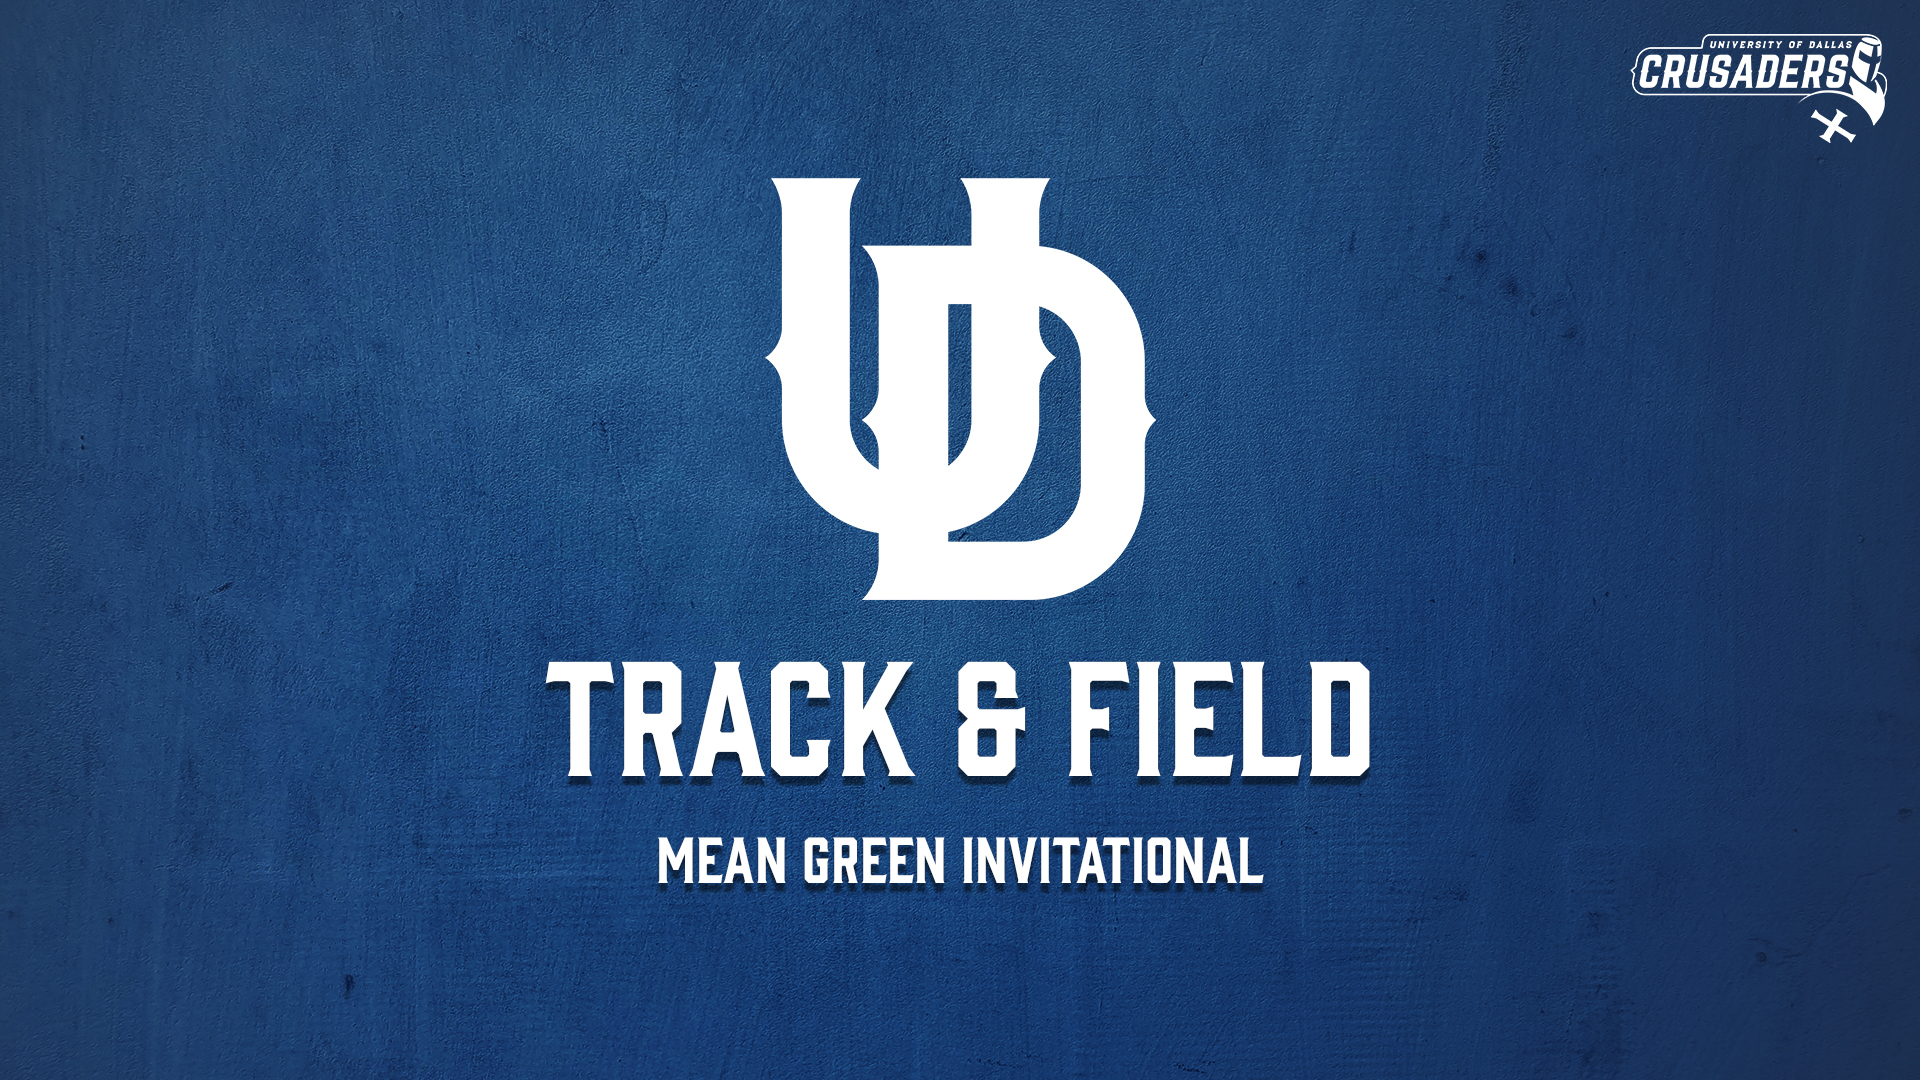 Track and Field Competes at Mean Green Invitational